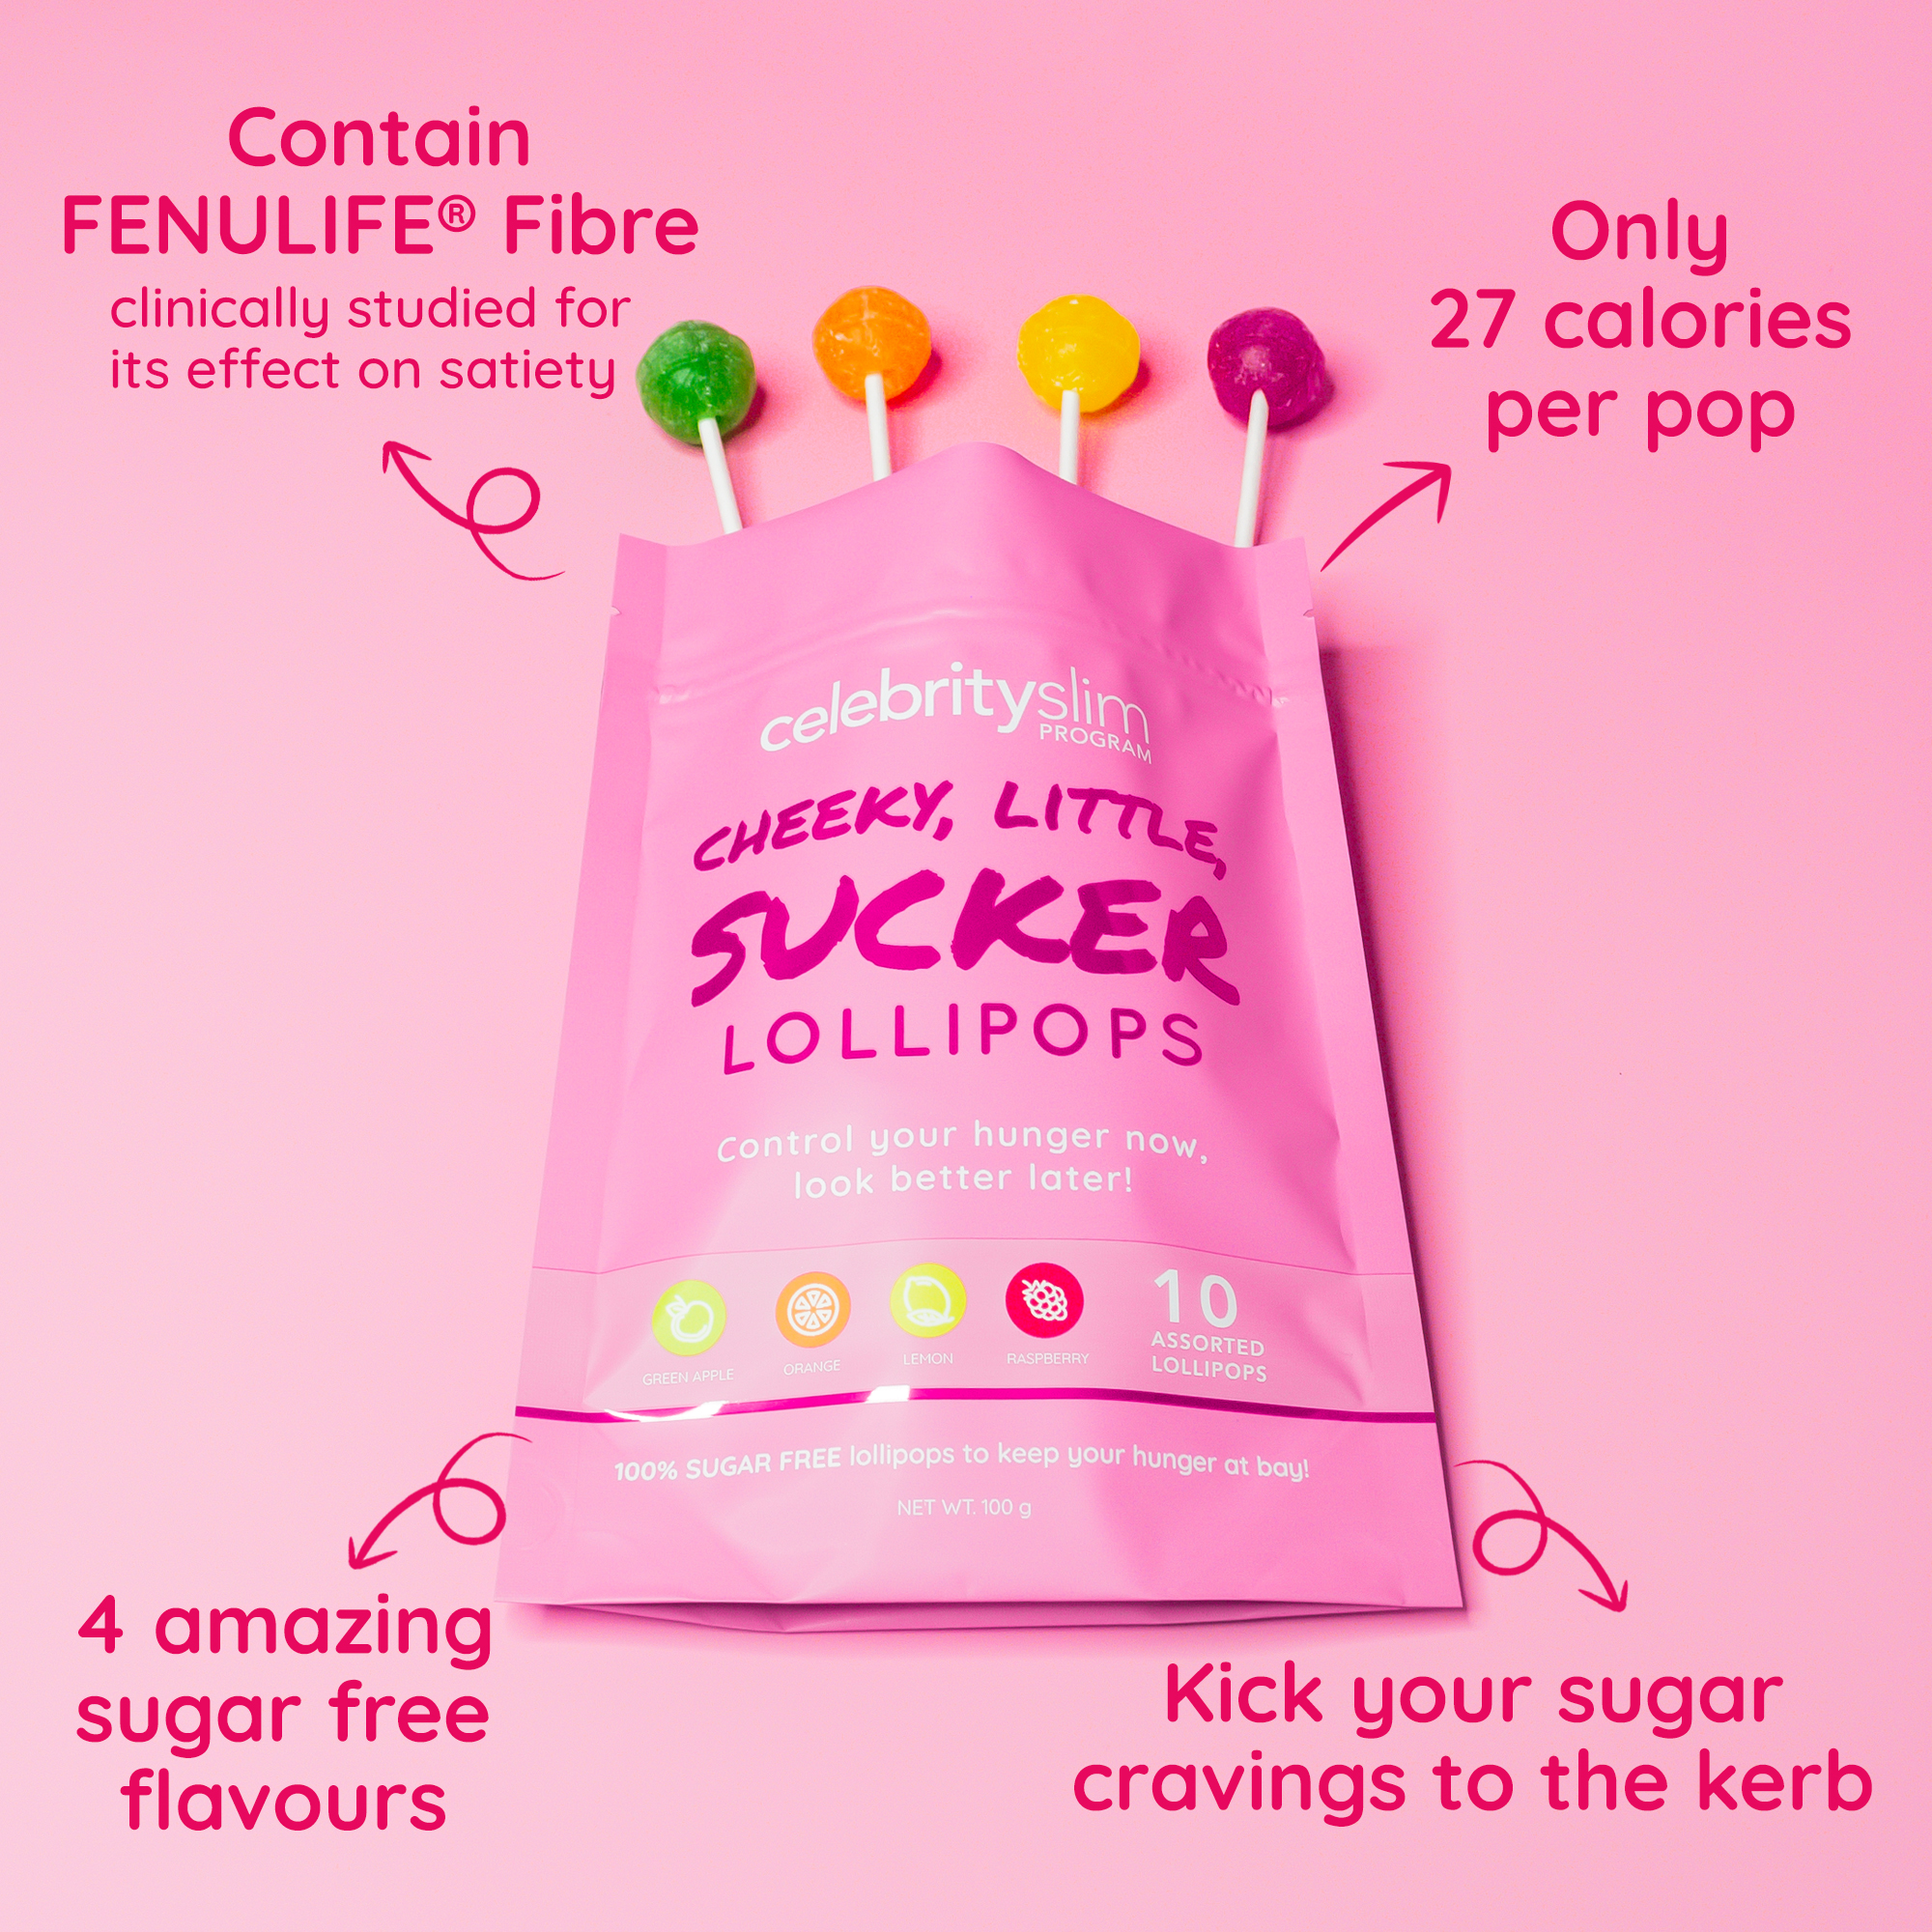 contain fenulife fibre. Clinically studied for its effect on satiety. Only 27 calories per pop. Kick your sugar cravings to the kerb. 4 amazing sugar free flavours